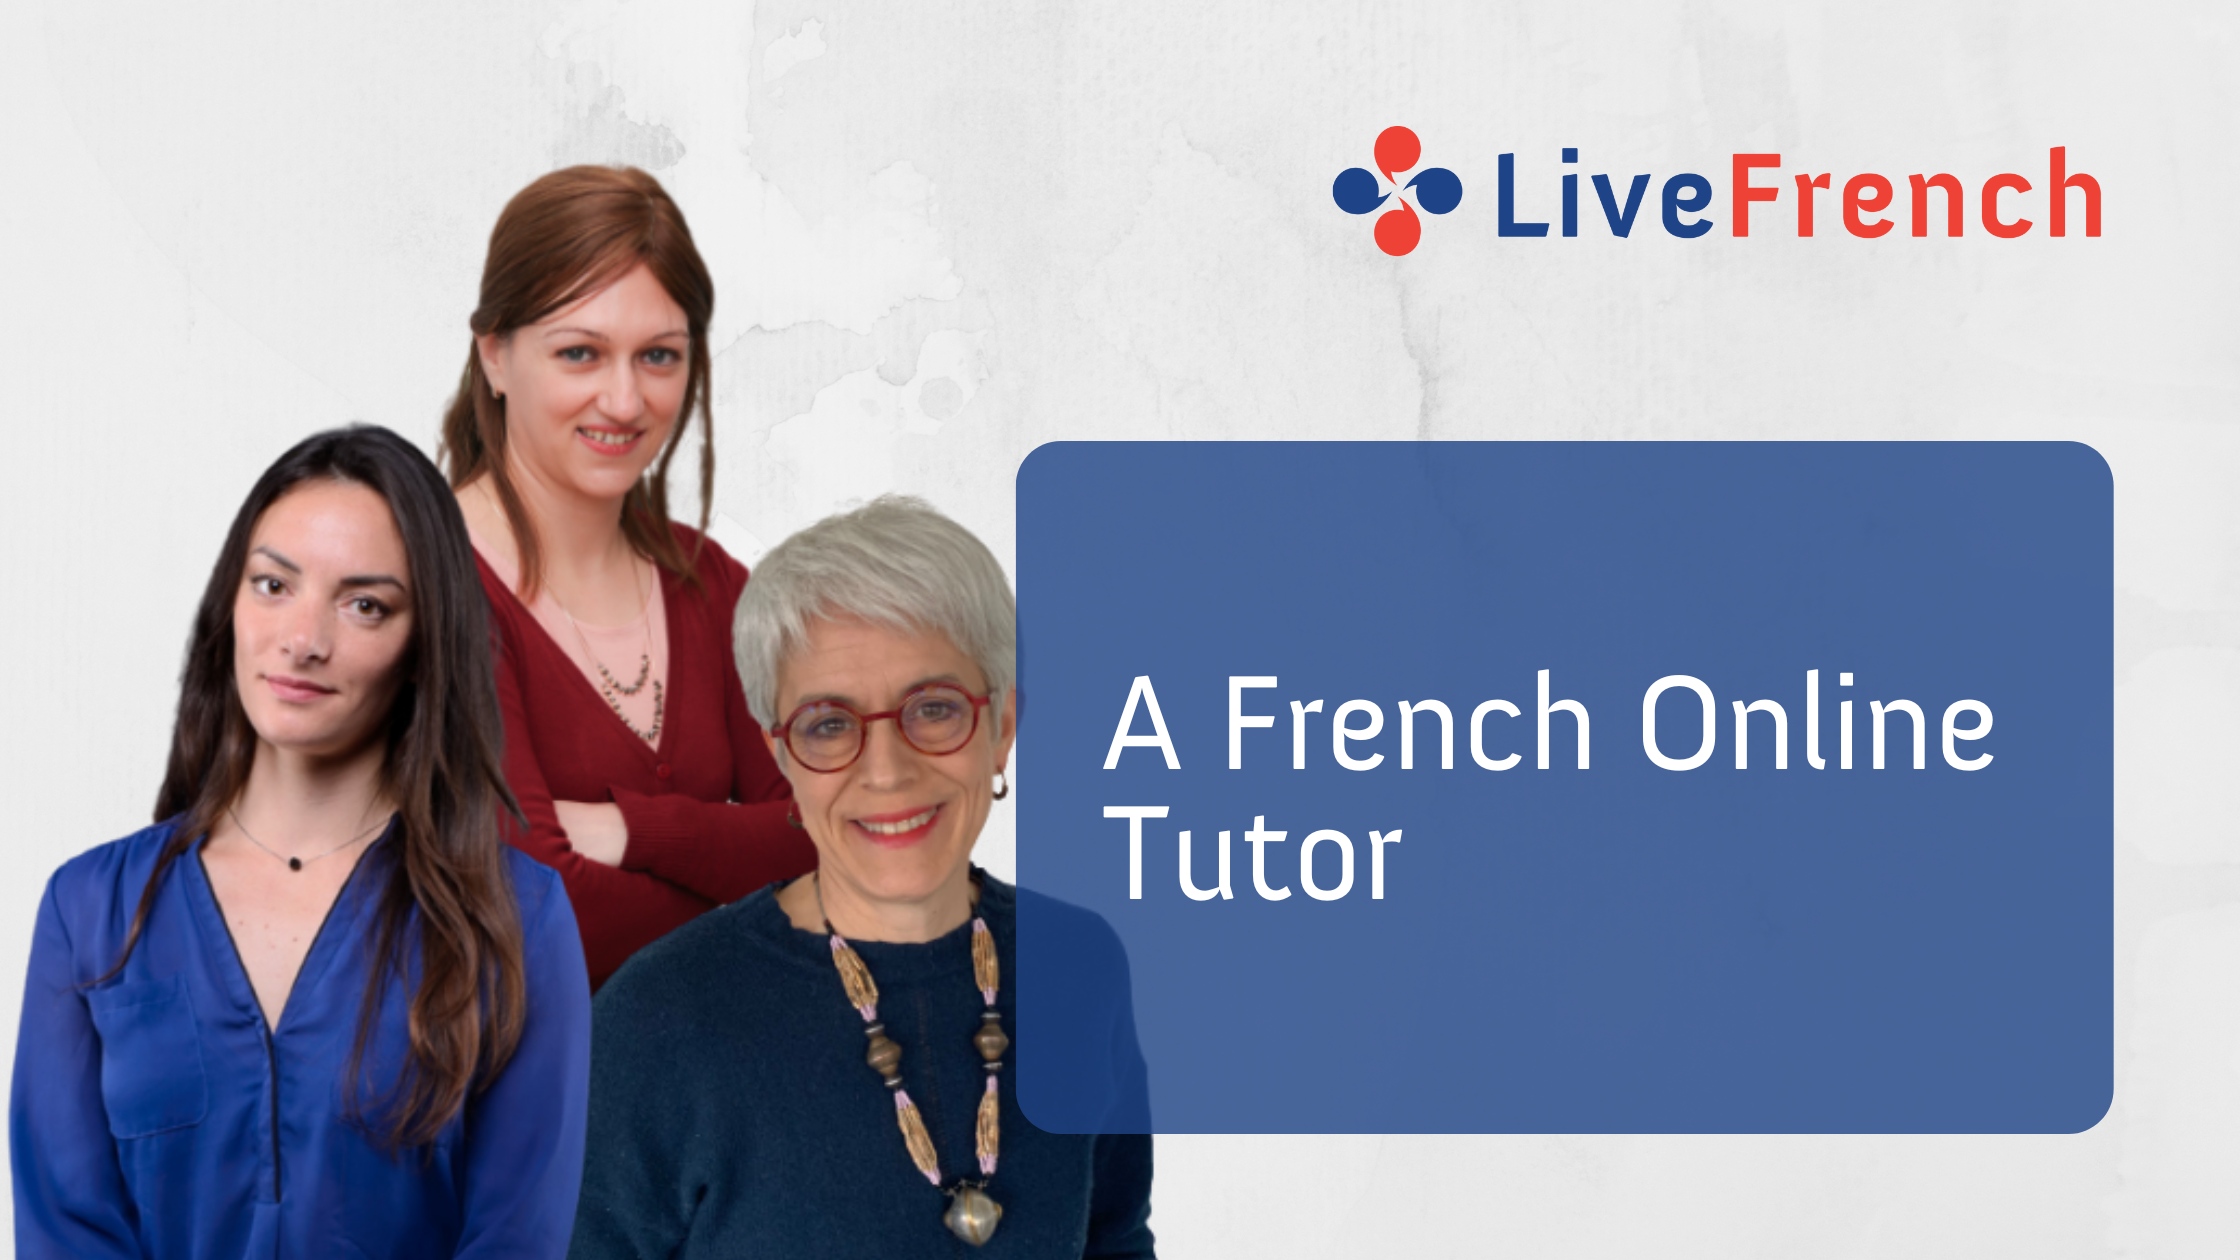 Live-French Online Tutor